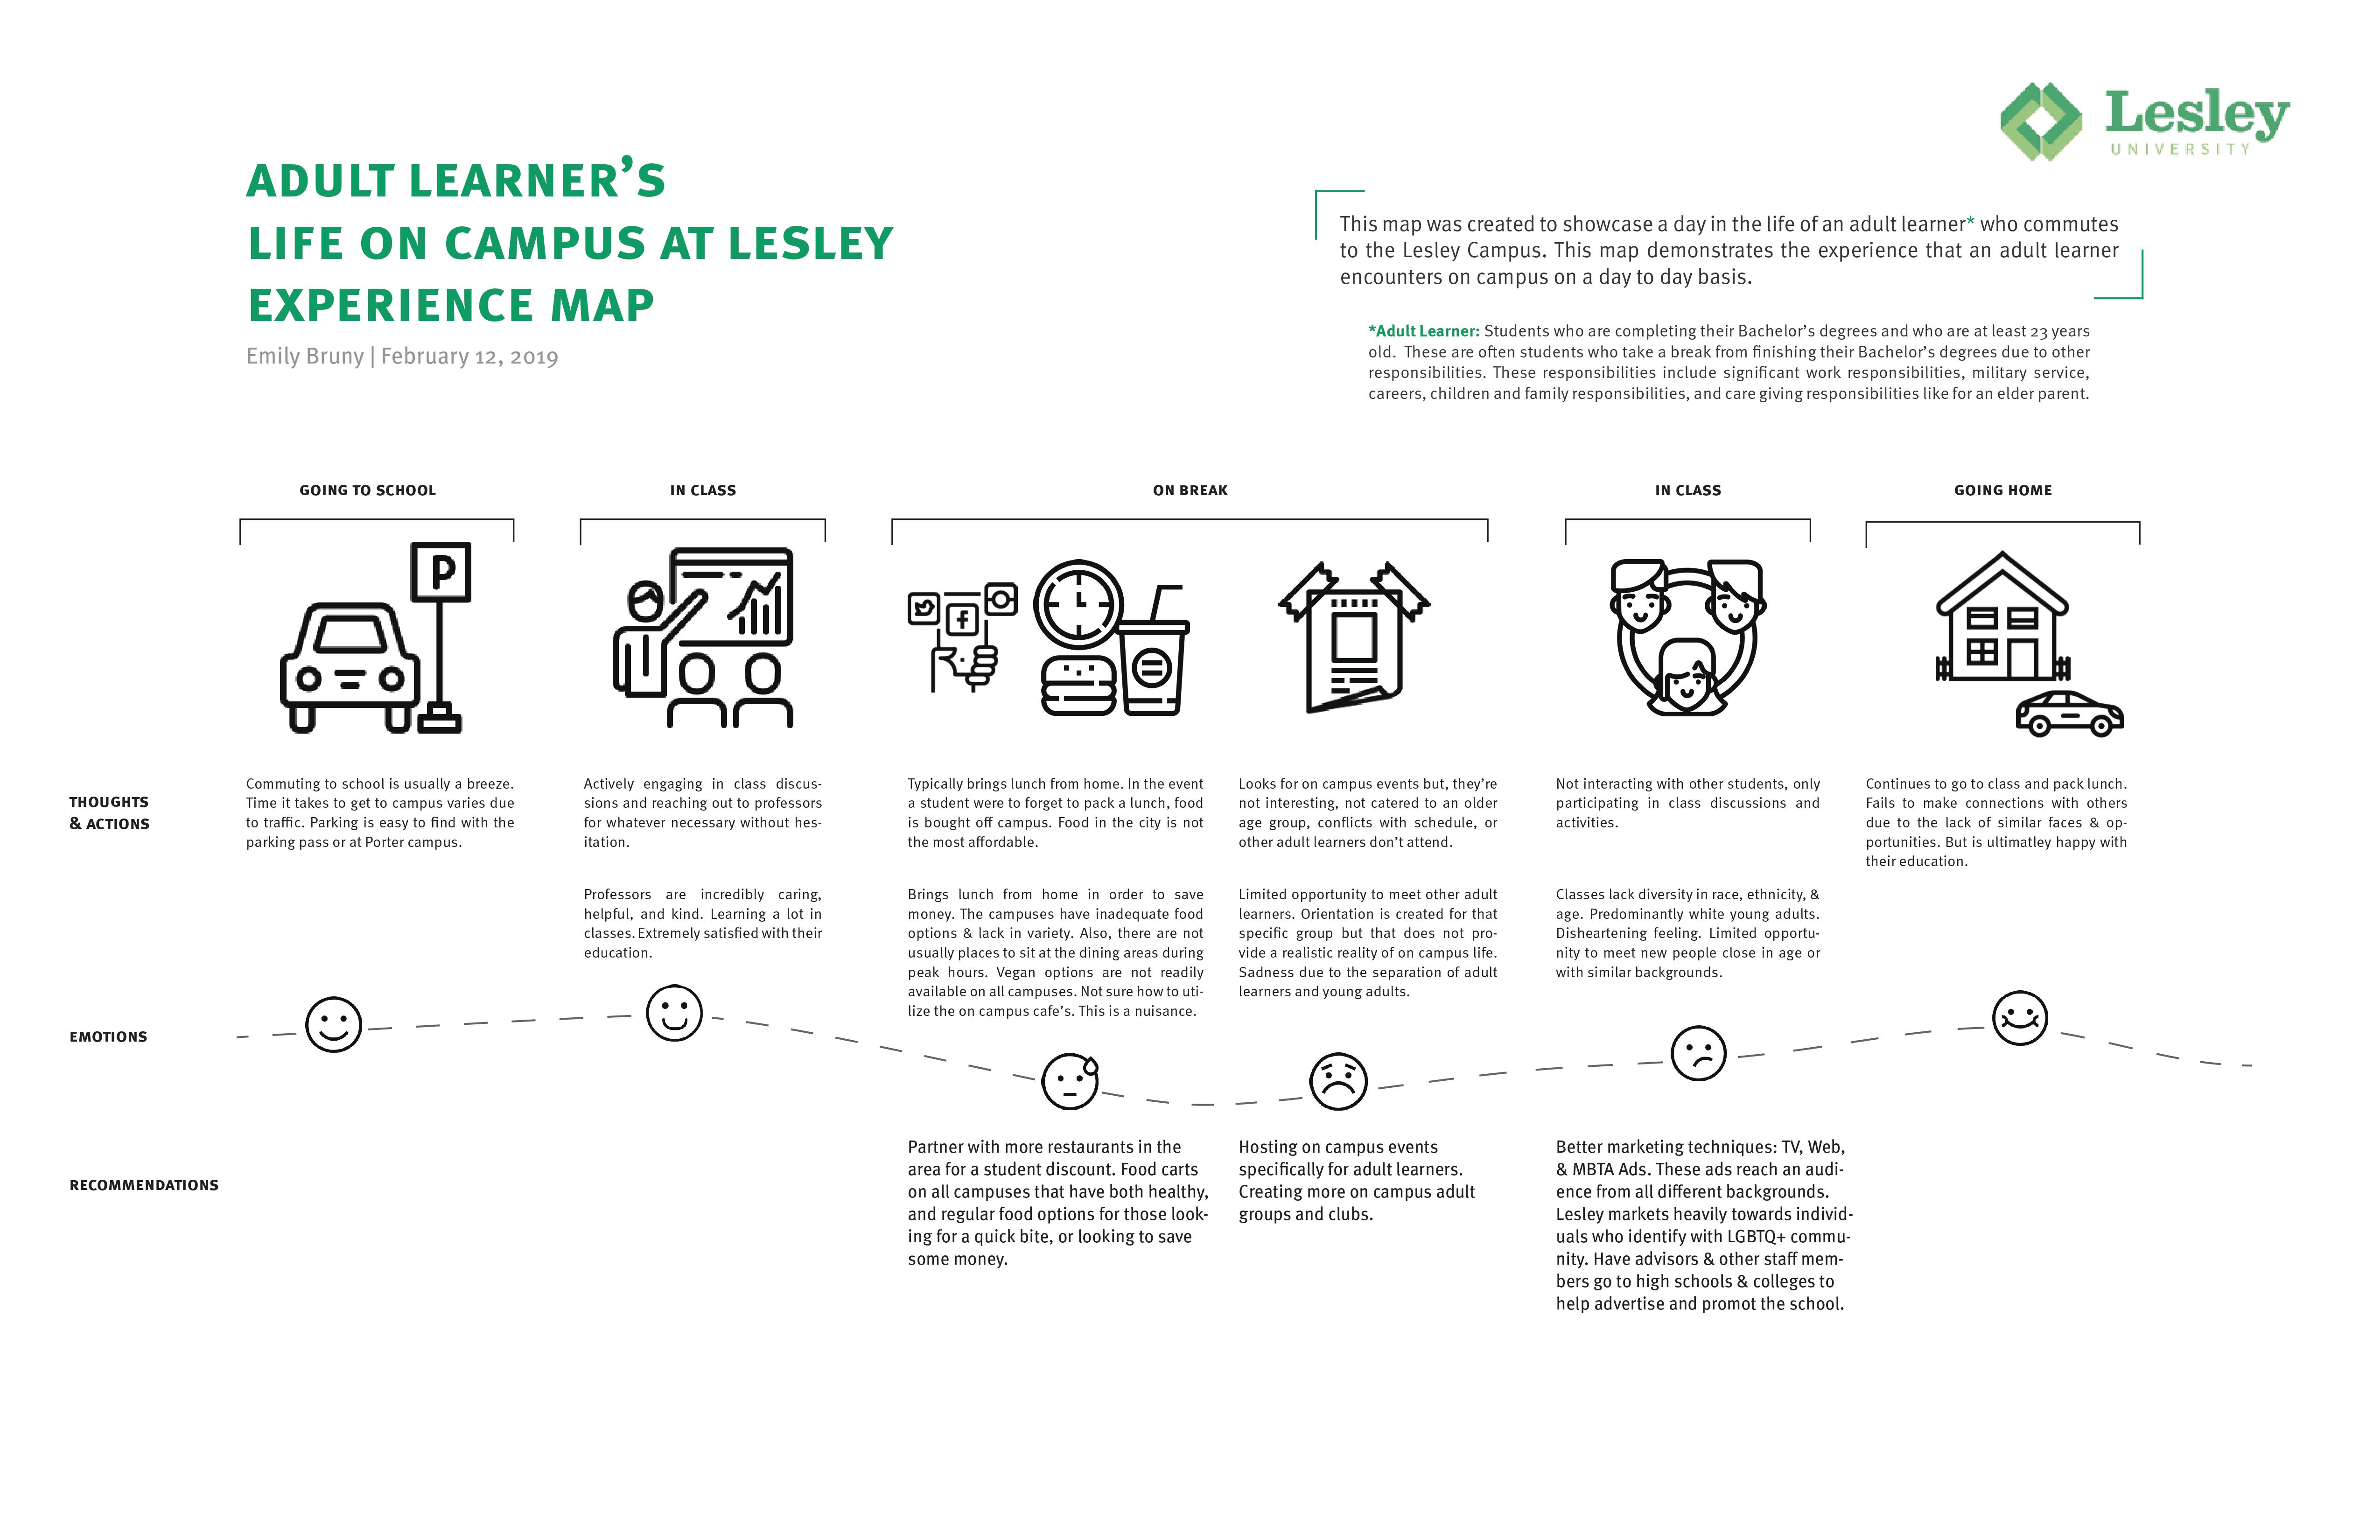 Adult learner experience map - showcases a day in the life of an adult learner